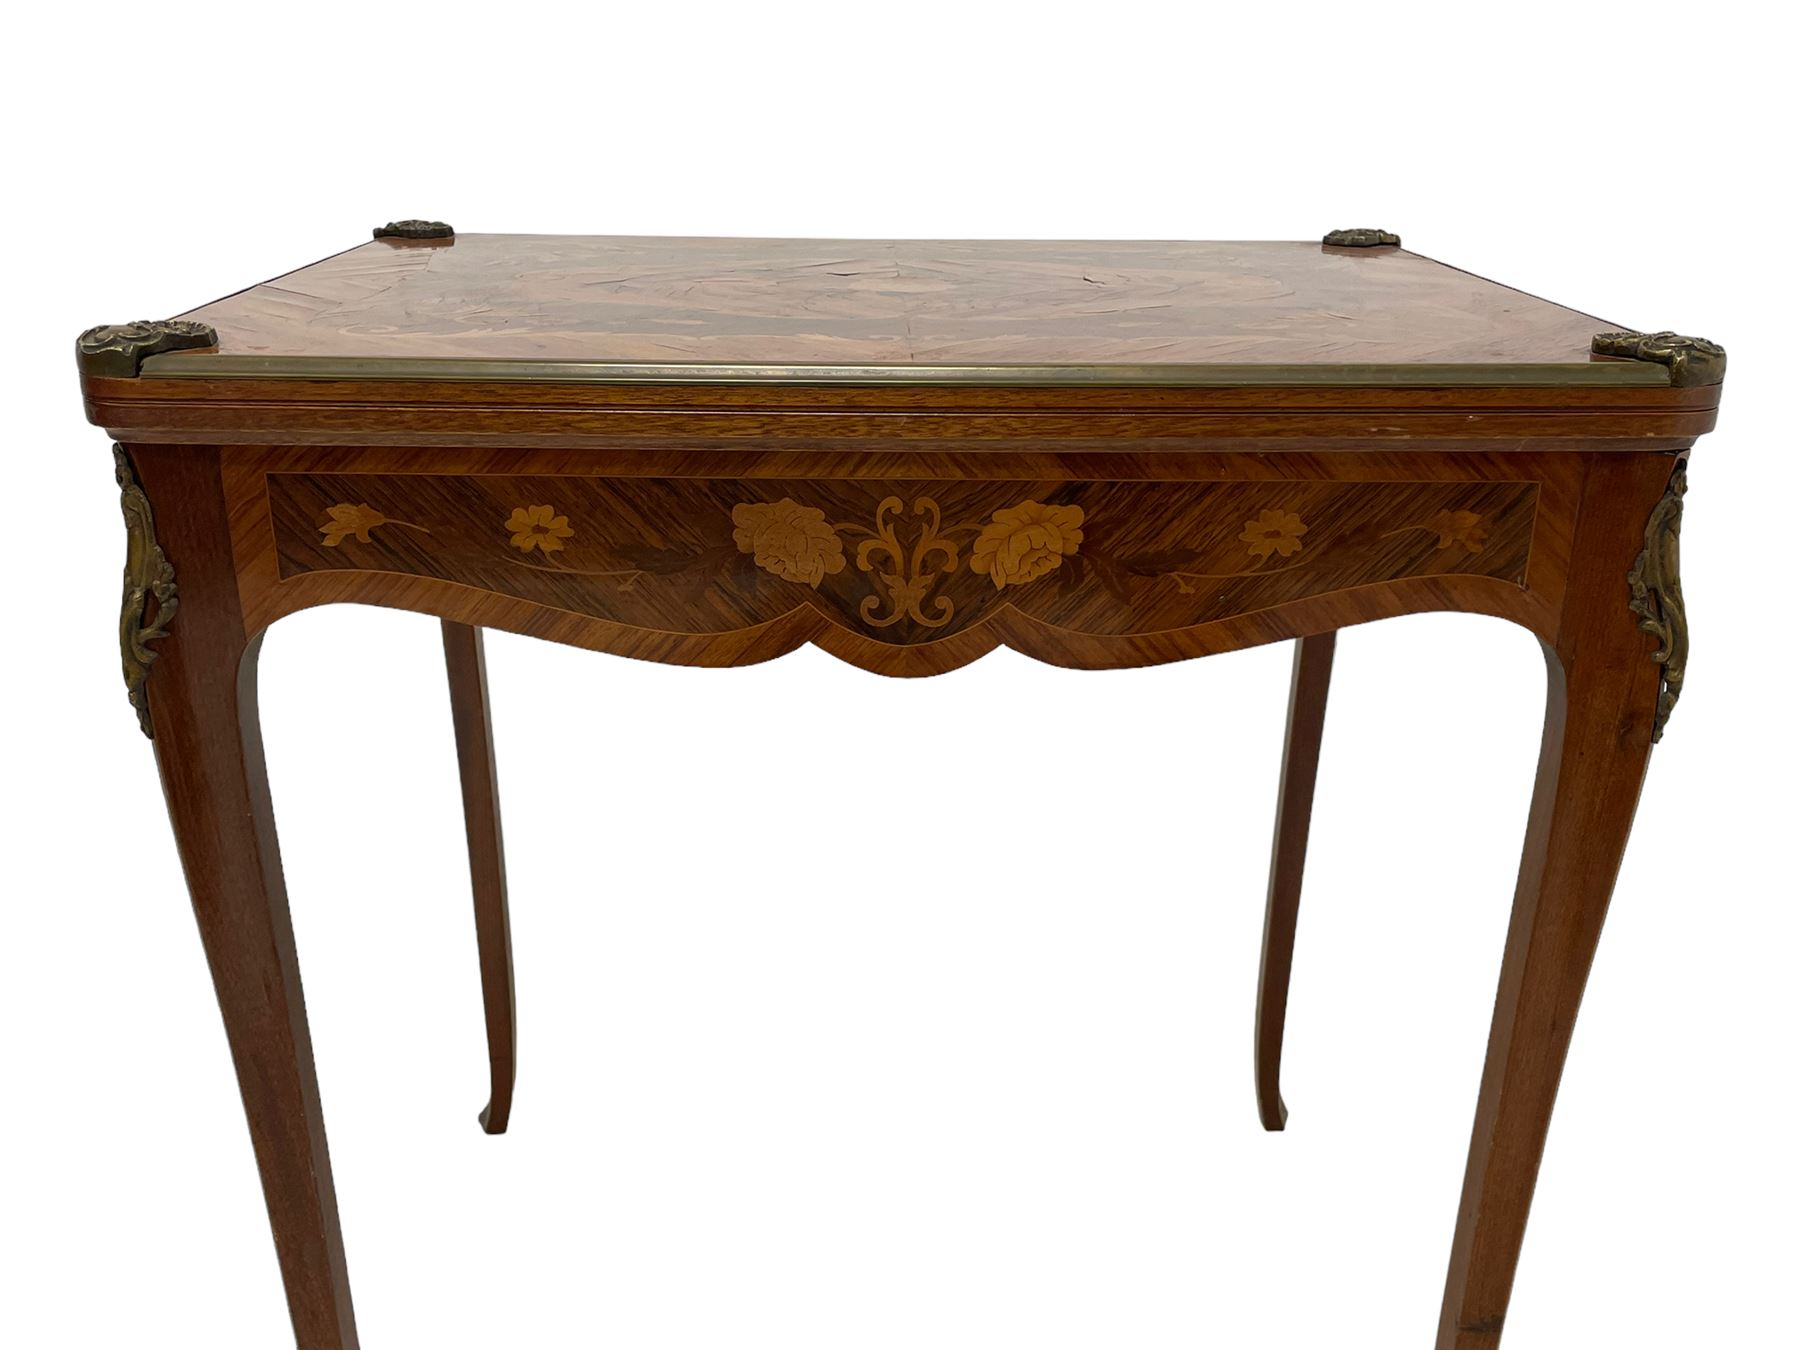 Mid-20th century Kingwood and rosewood card or games table - Image 8 of 10